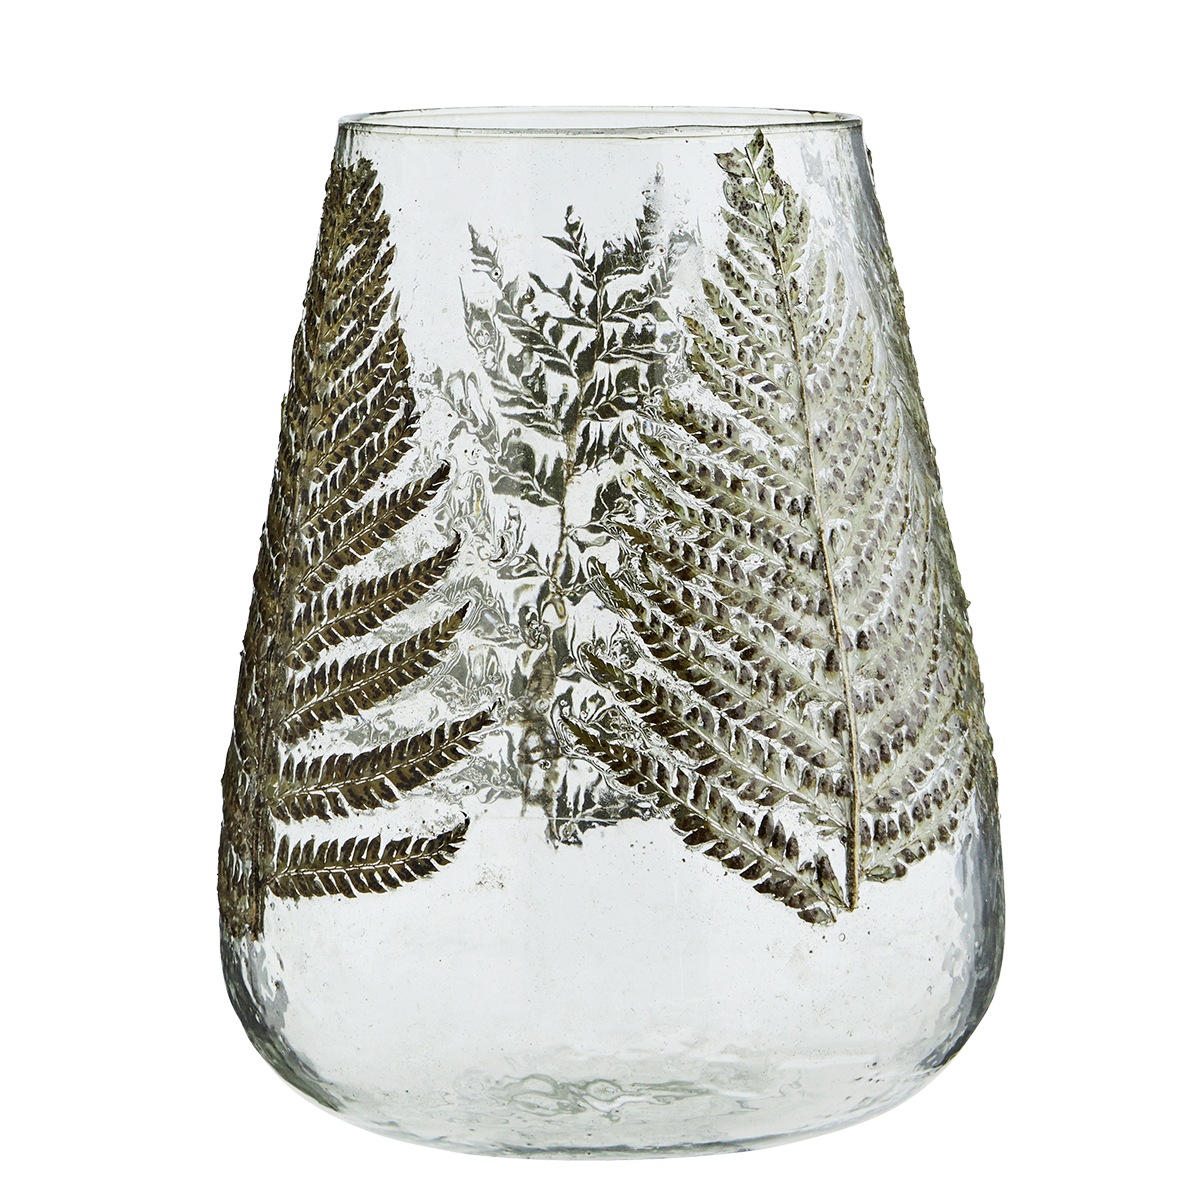 Glass vase with leaves, 19x26 cm